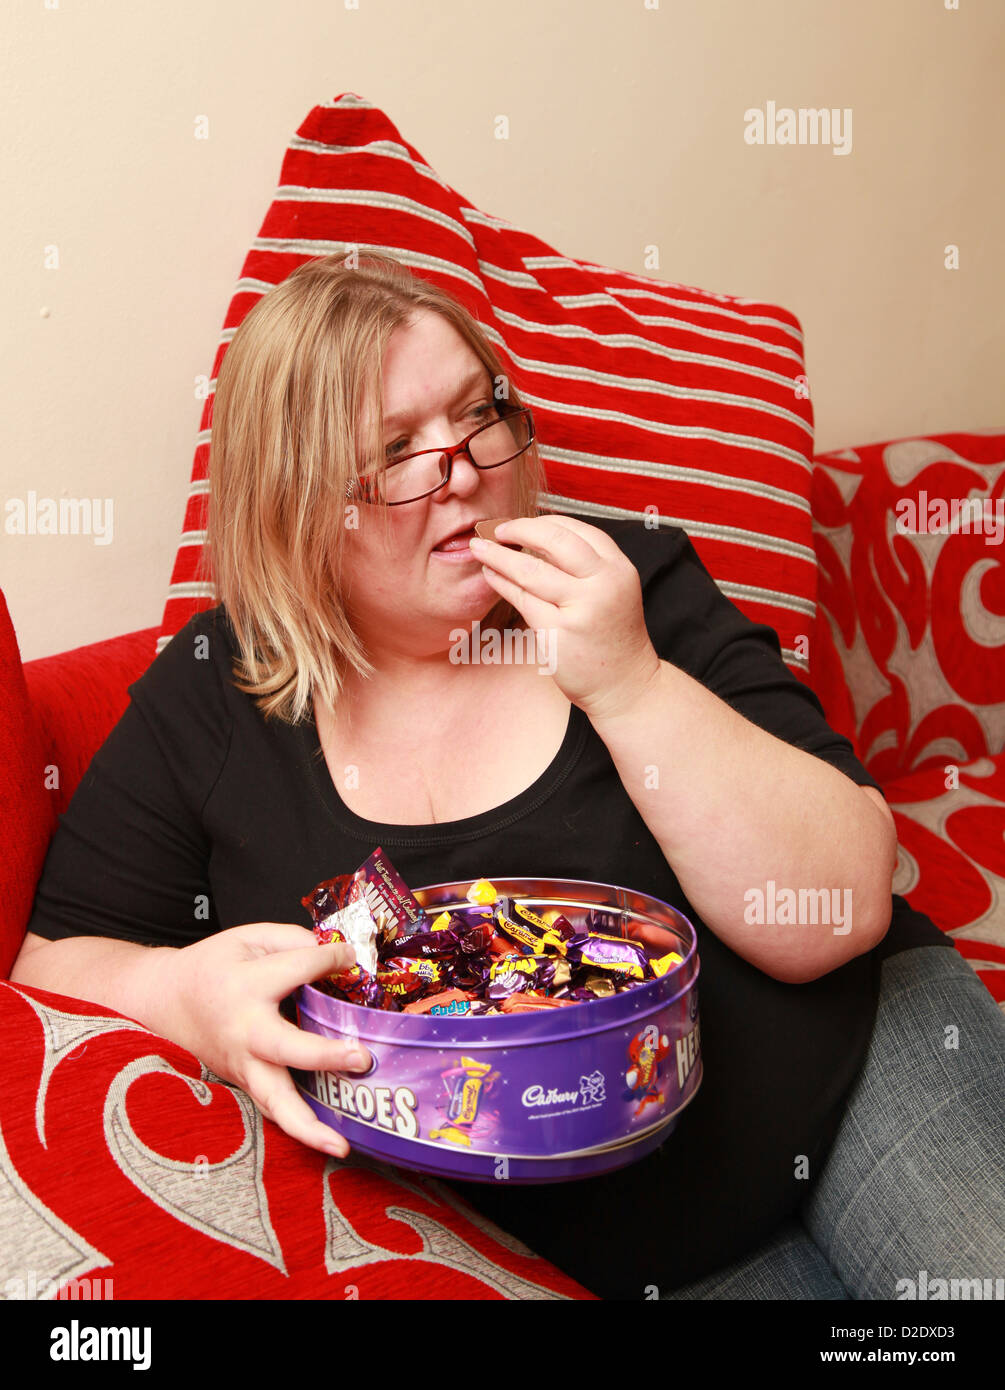 Overweight Woman Eating Chocolates Stock Photo